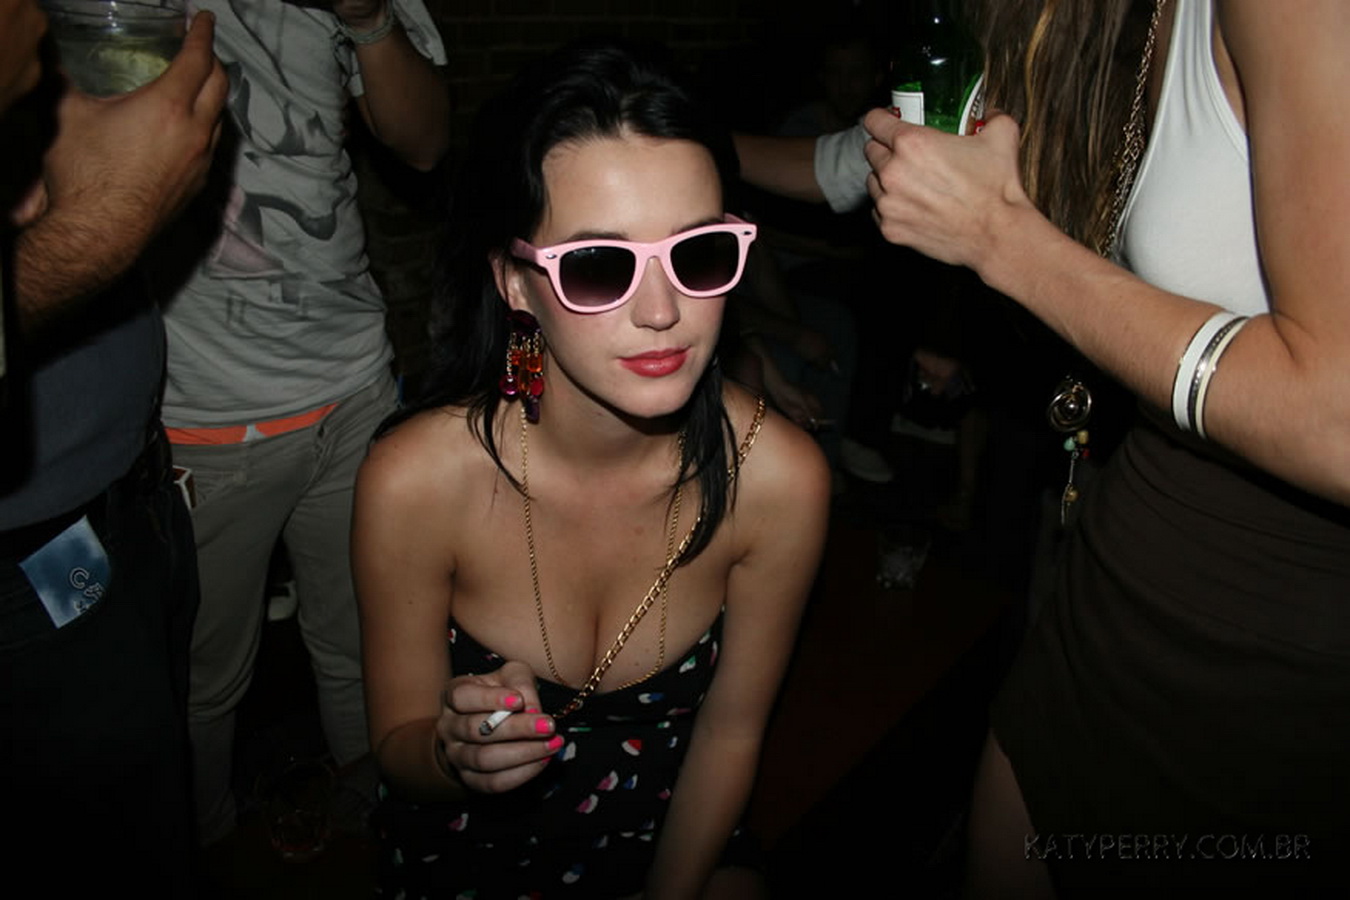 Katy_Perry_bobsslip_drunk_cleavage_downblouse_upskirt_nipslip_at_her_birthday_2007_party_99x_HQ_36.jpg